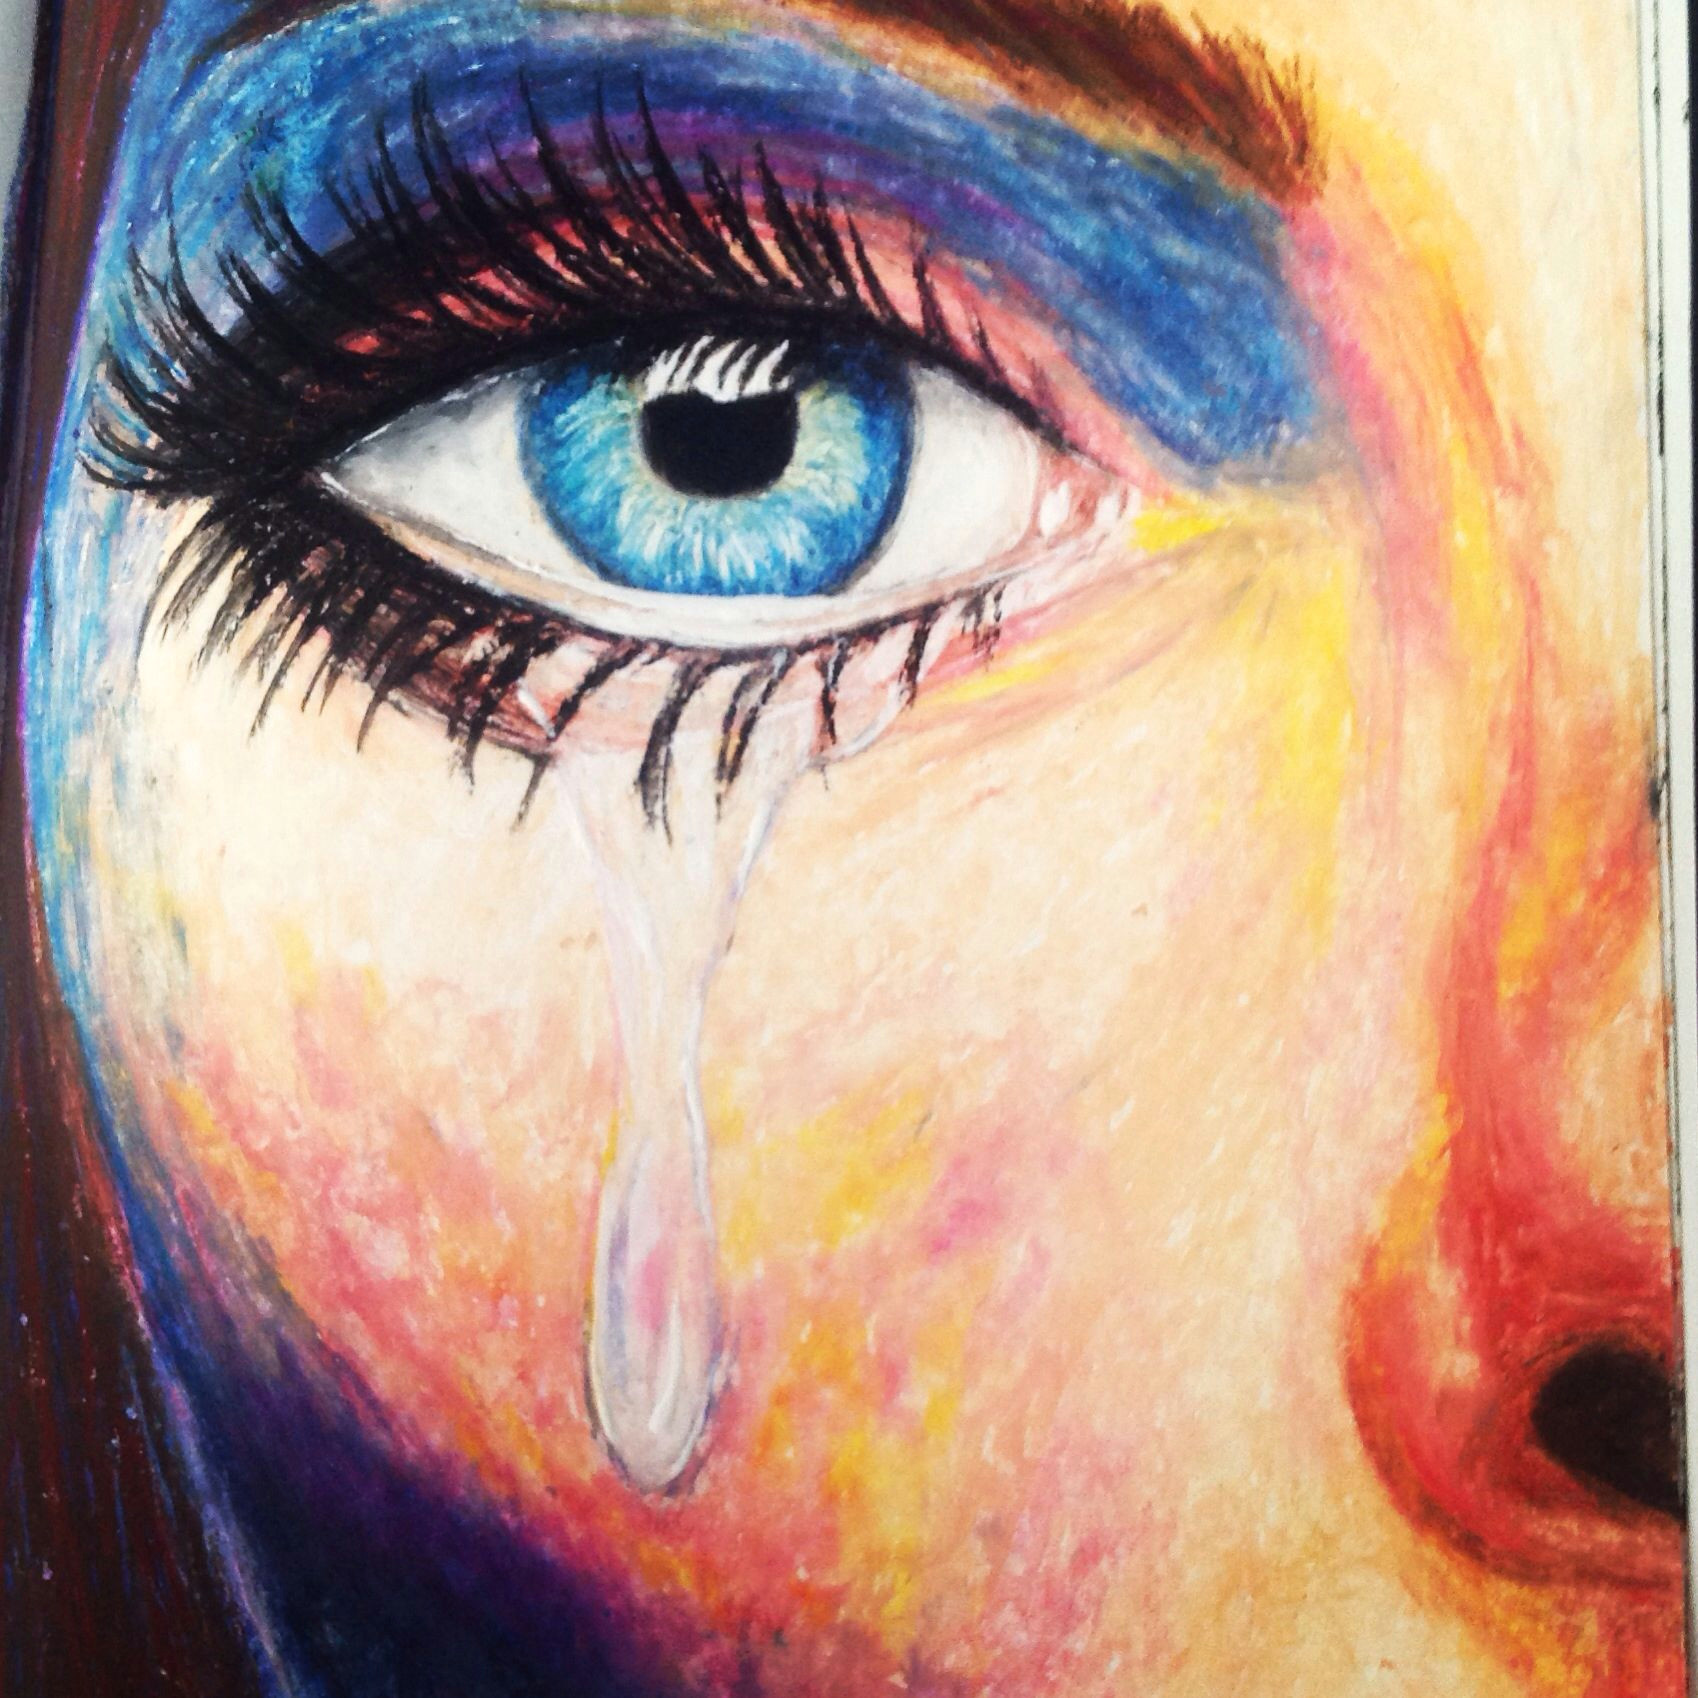 Drawing An Eye with Pastels by Sierra Autumn Oil Pastels My Personal Drawings Art